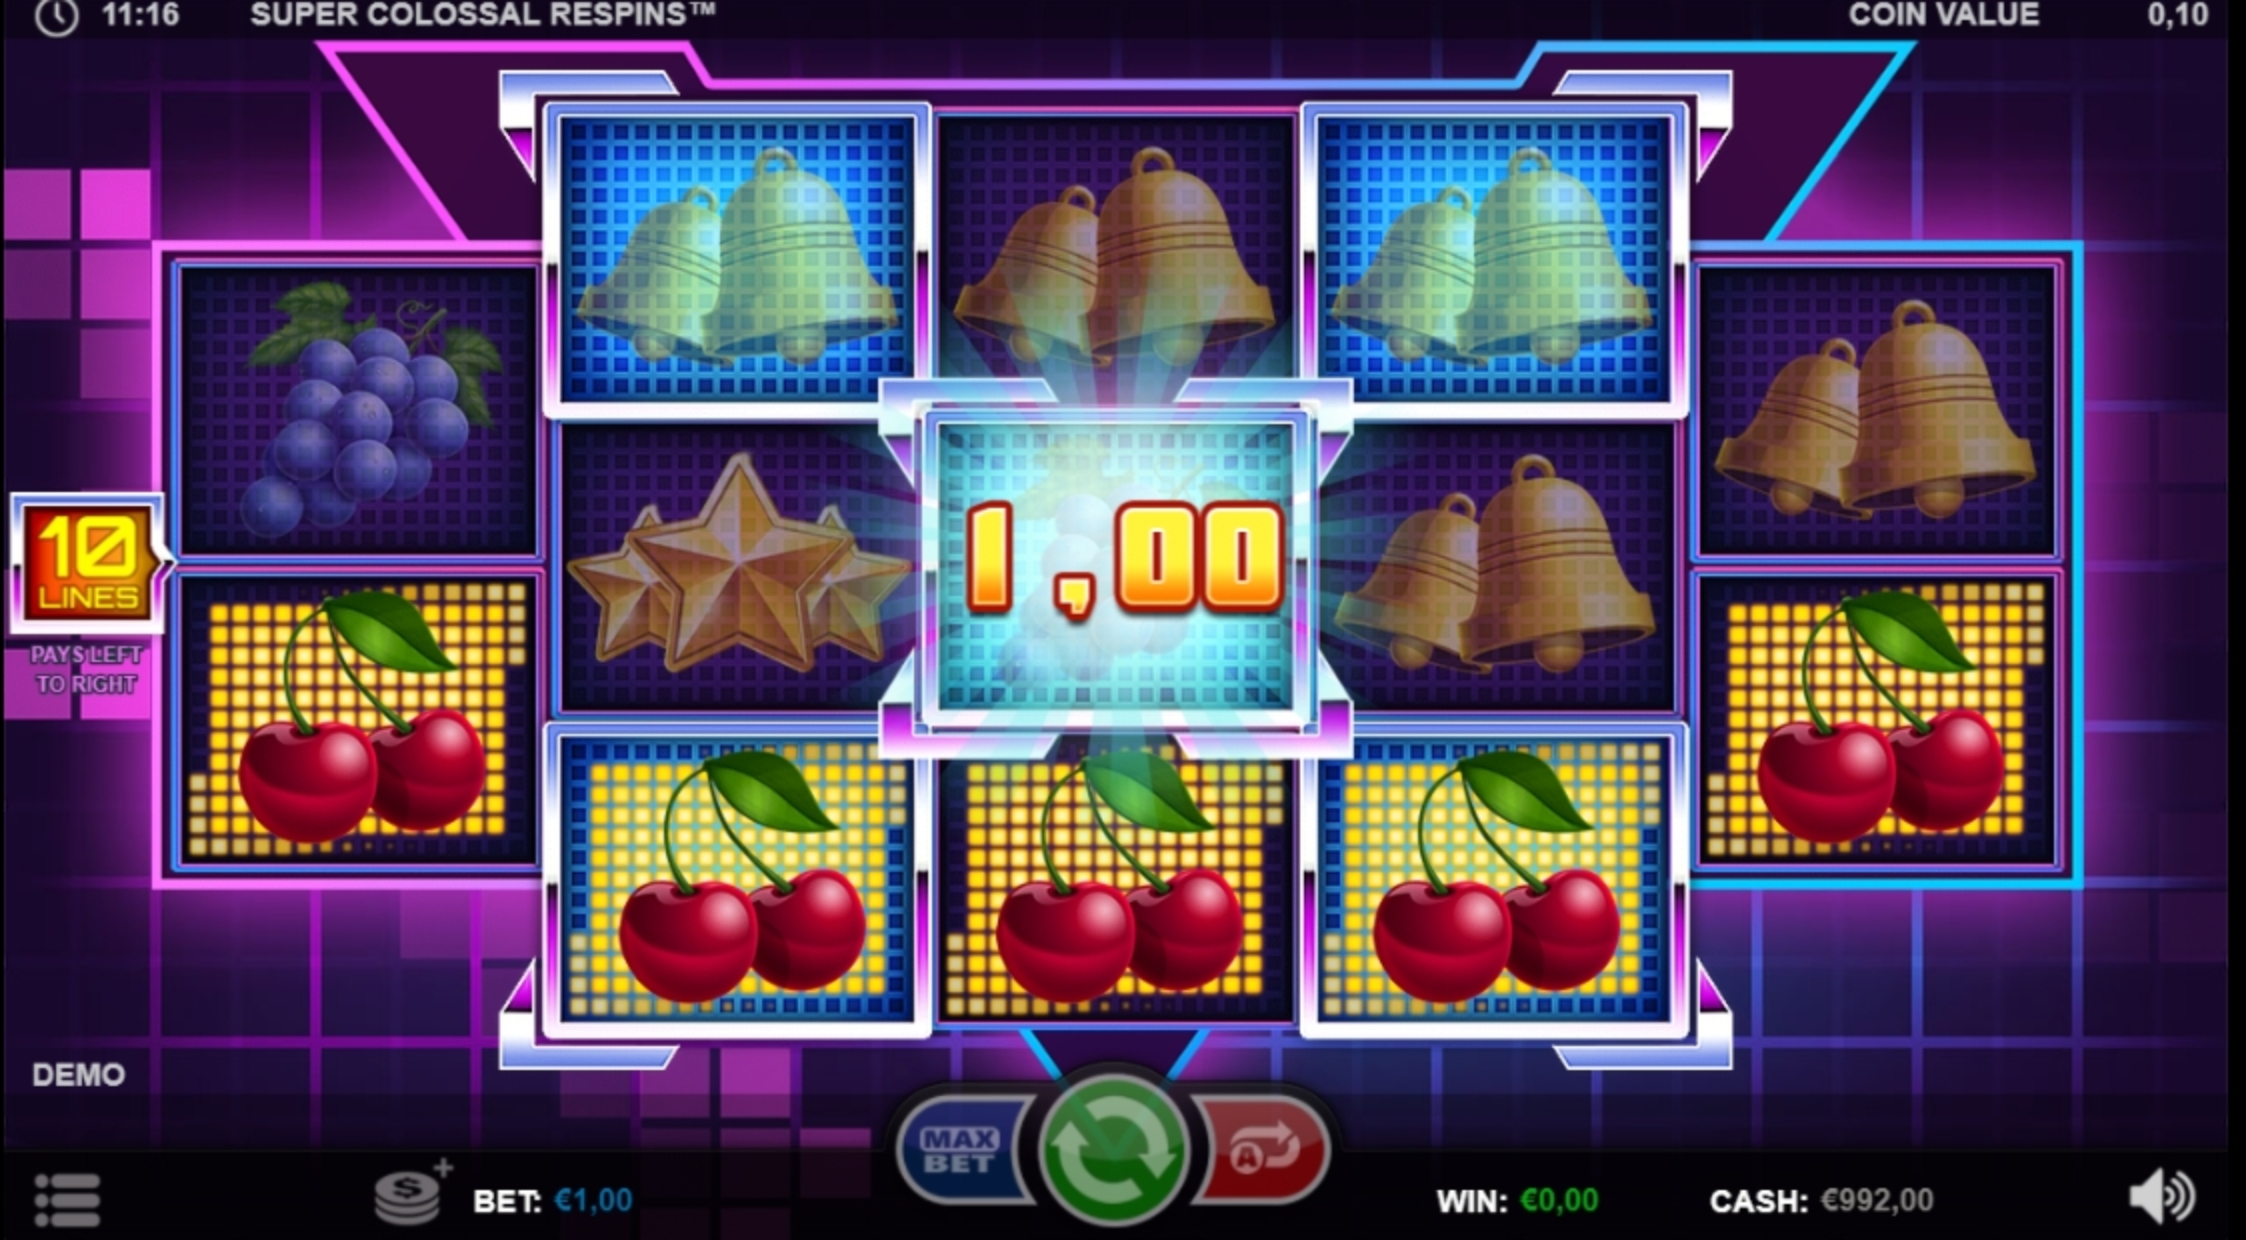 Win Money in Super Colossal Respins Free Slot Game by Games Inc